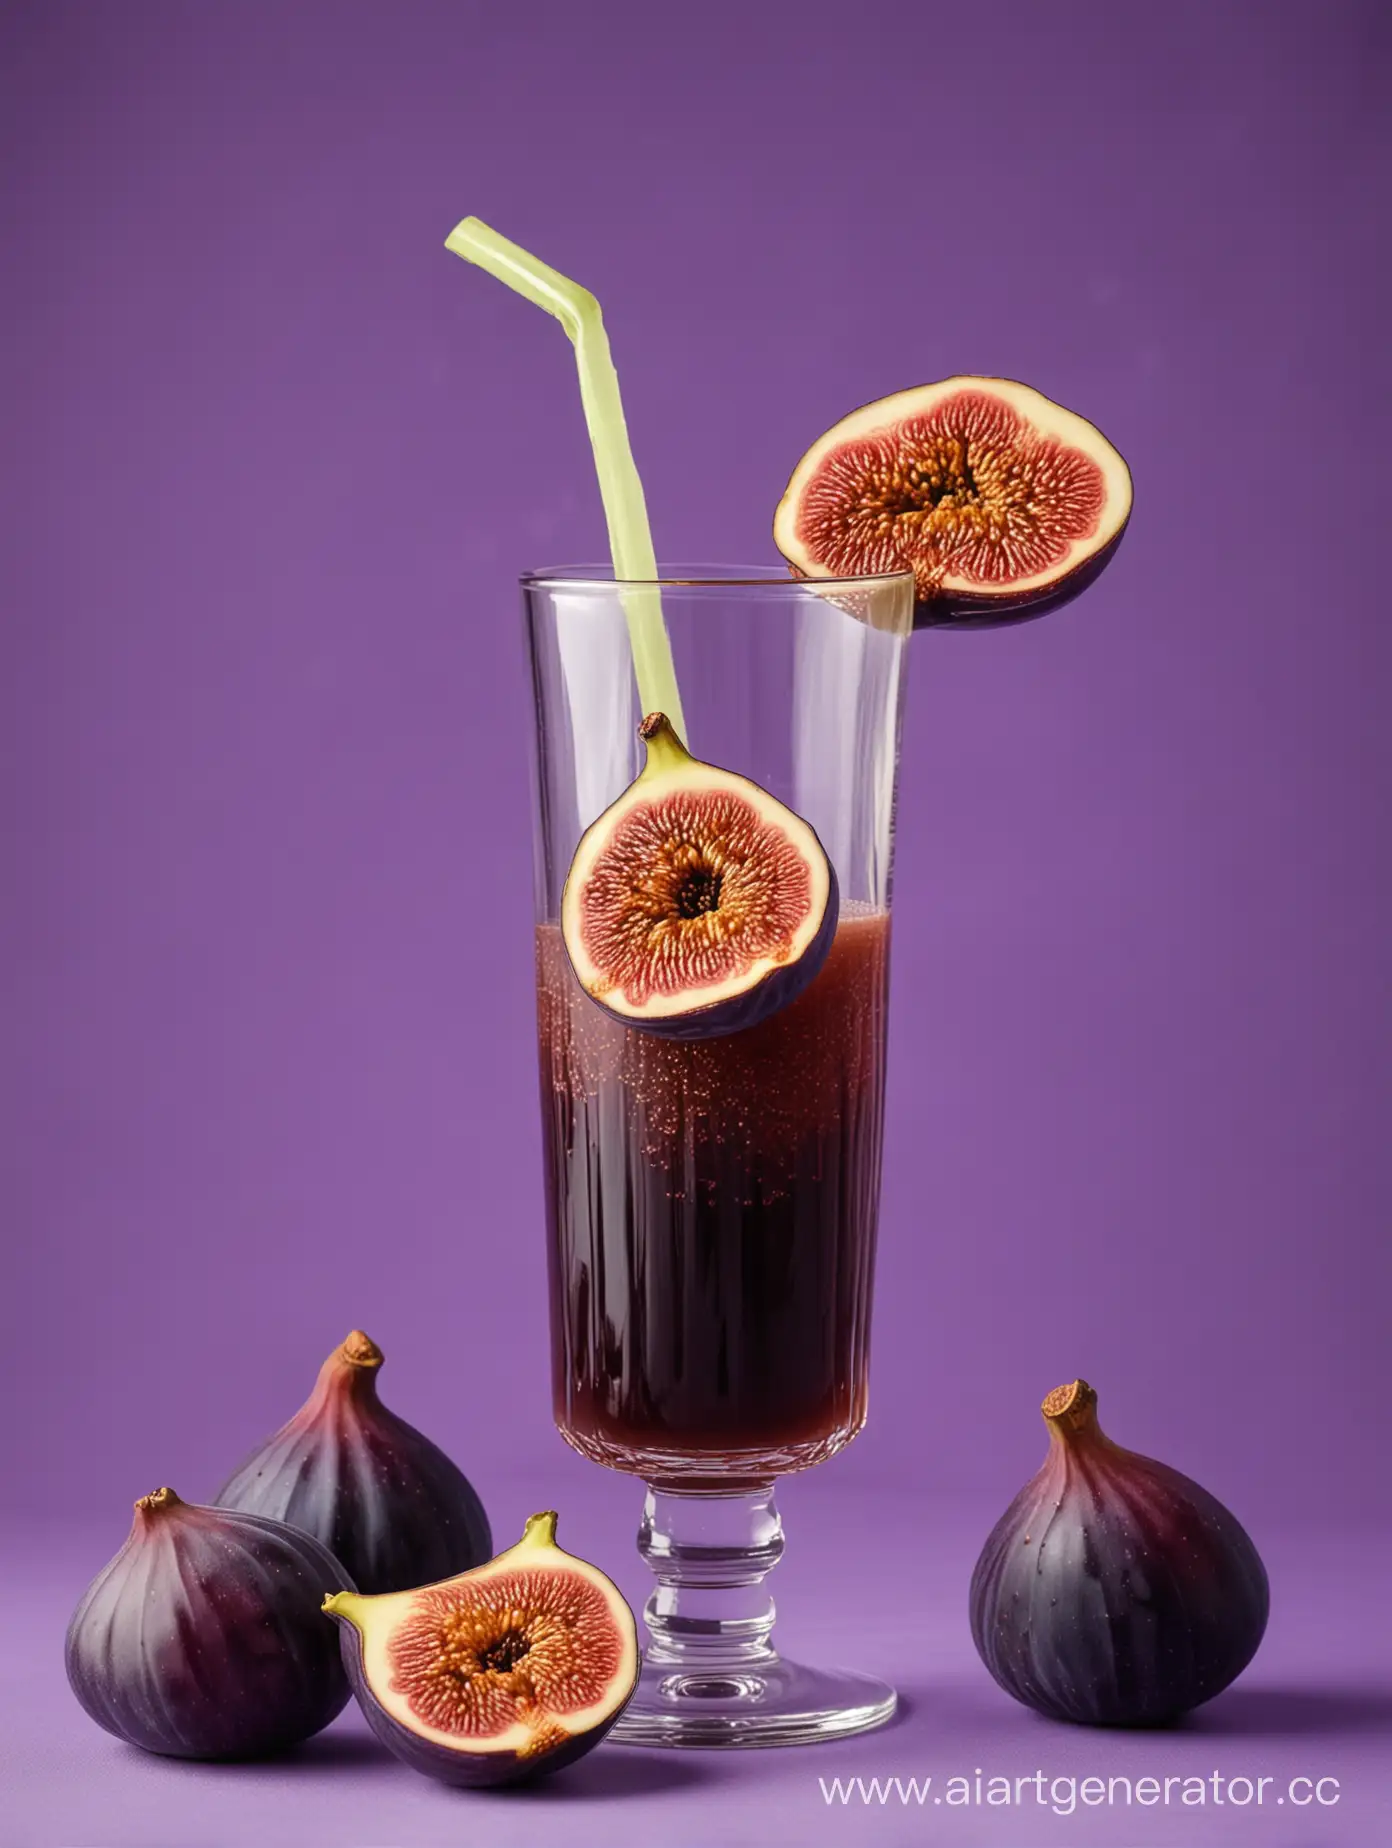 Ripe-Fig-with-Freshly-Squeezed-Juice-in-Elegant-Glass-on-Vibrant-Purple-Background